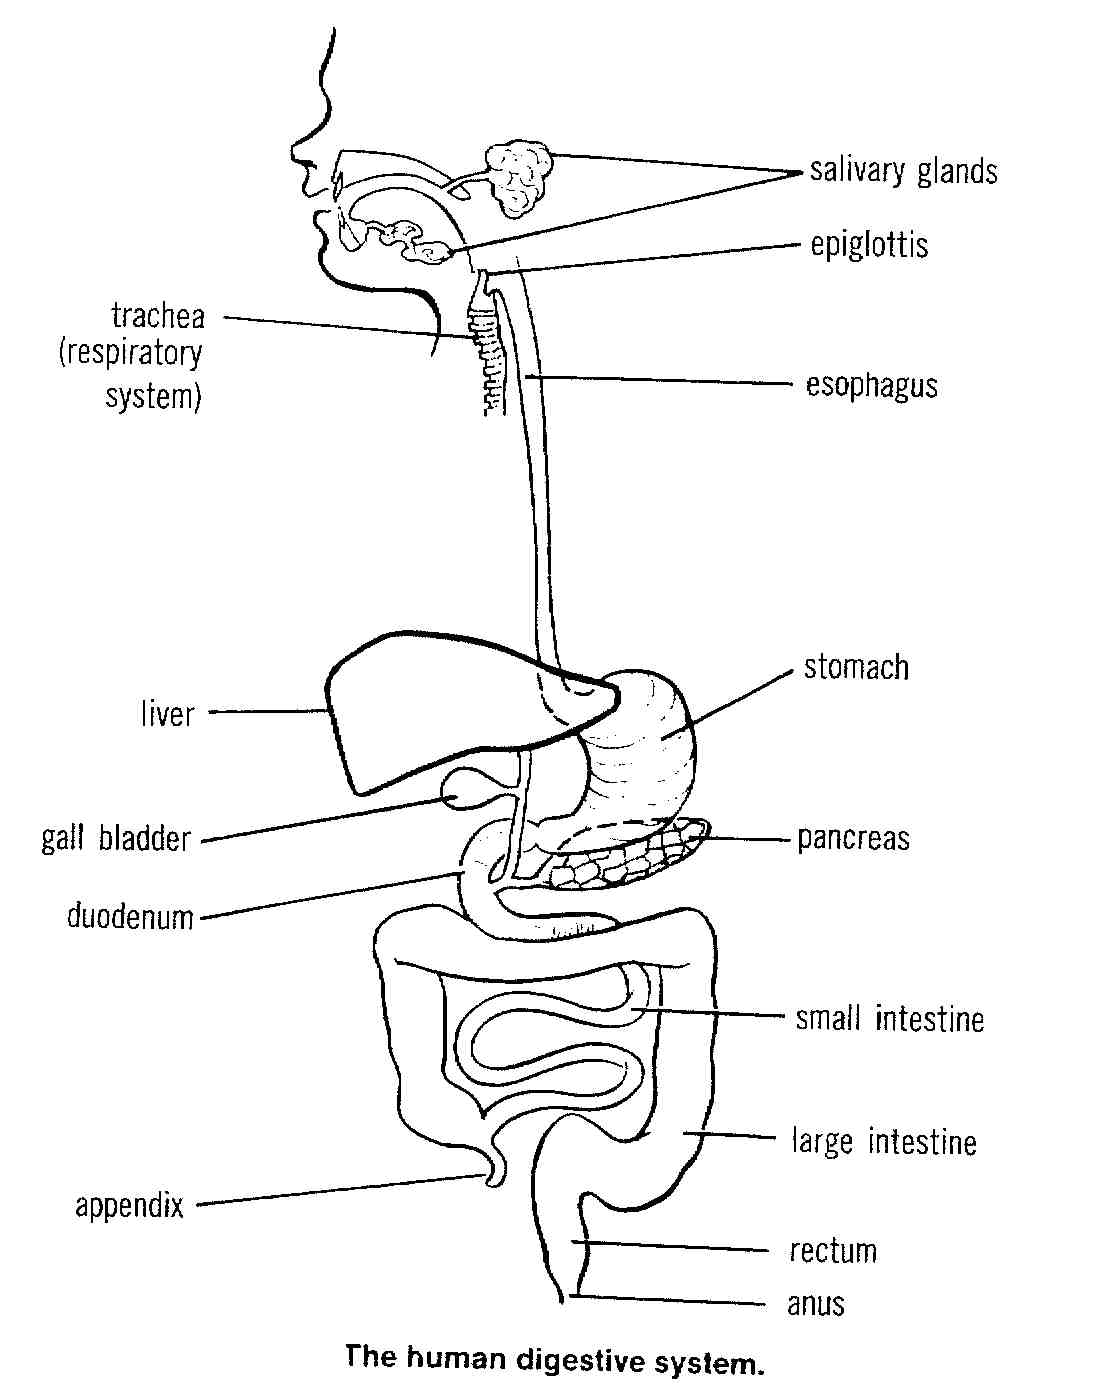 Human Digestive System Parts Image